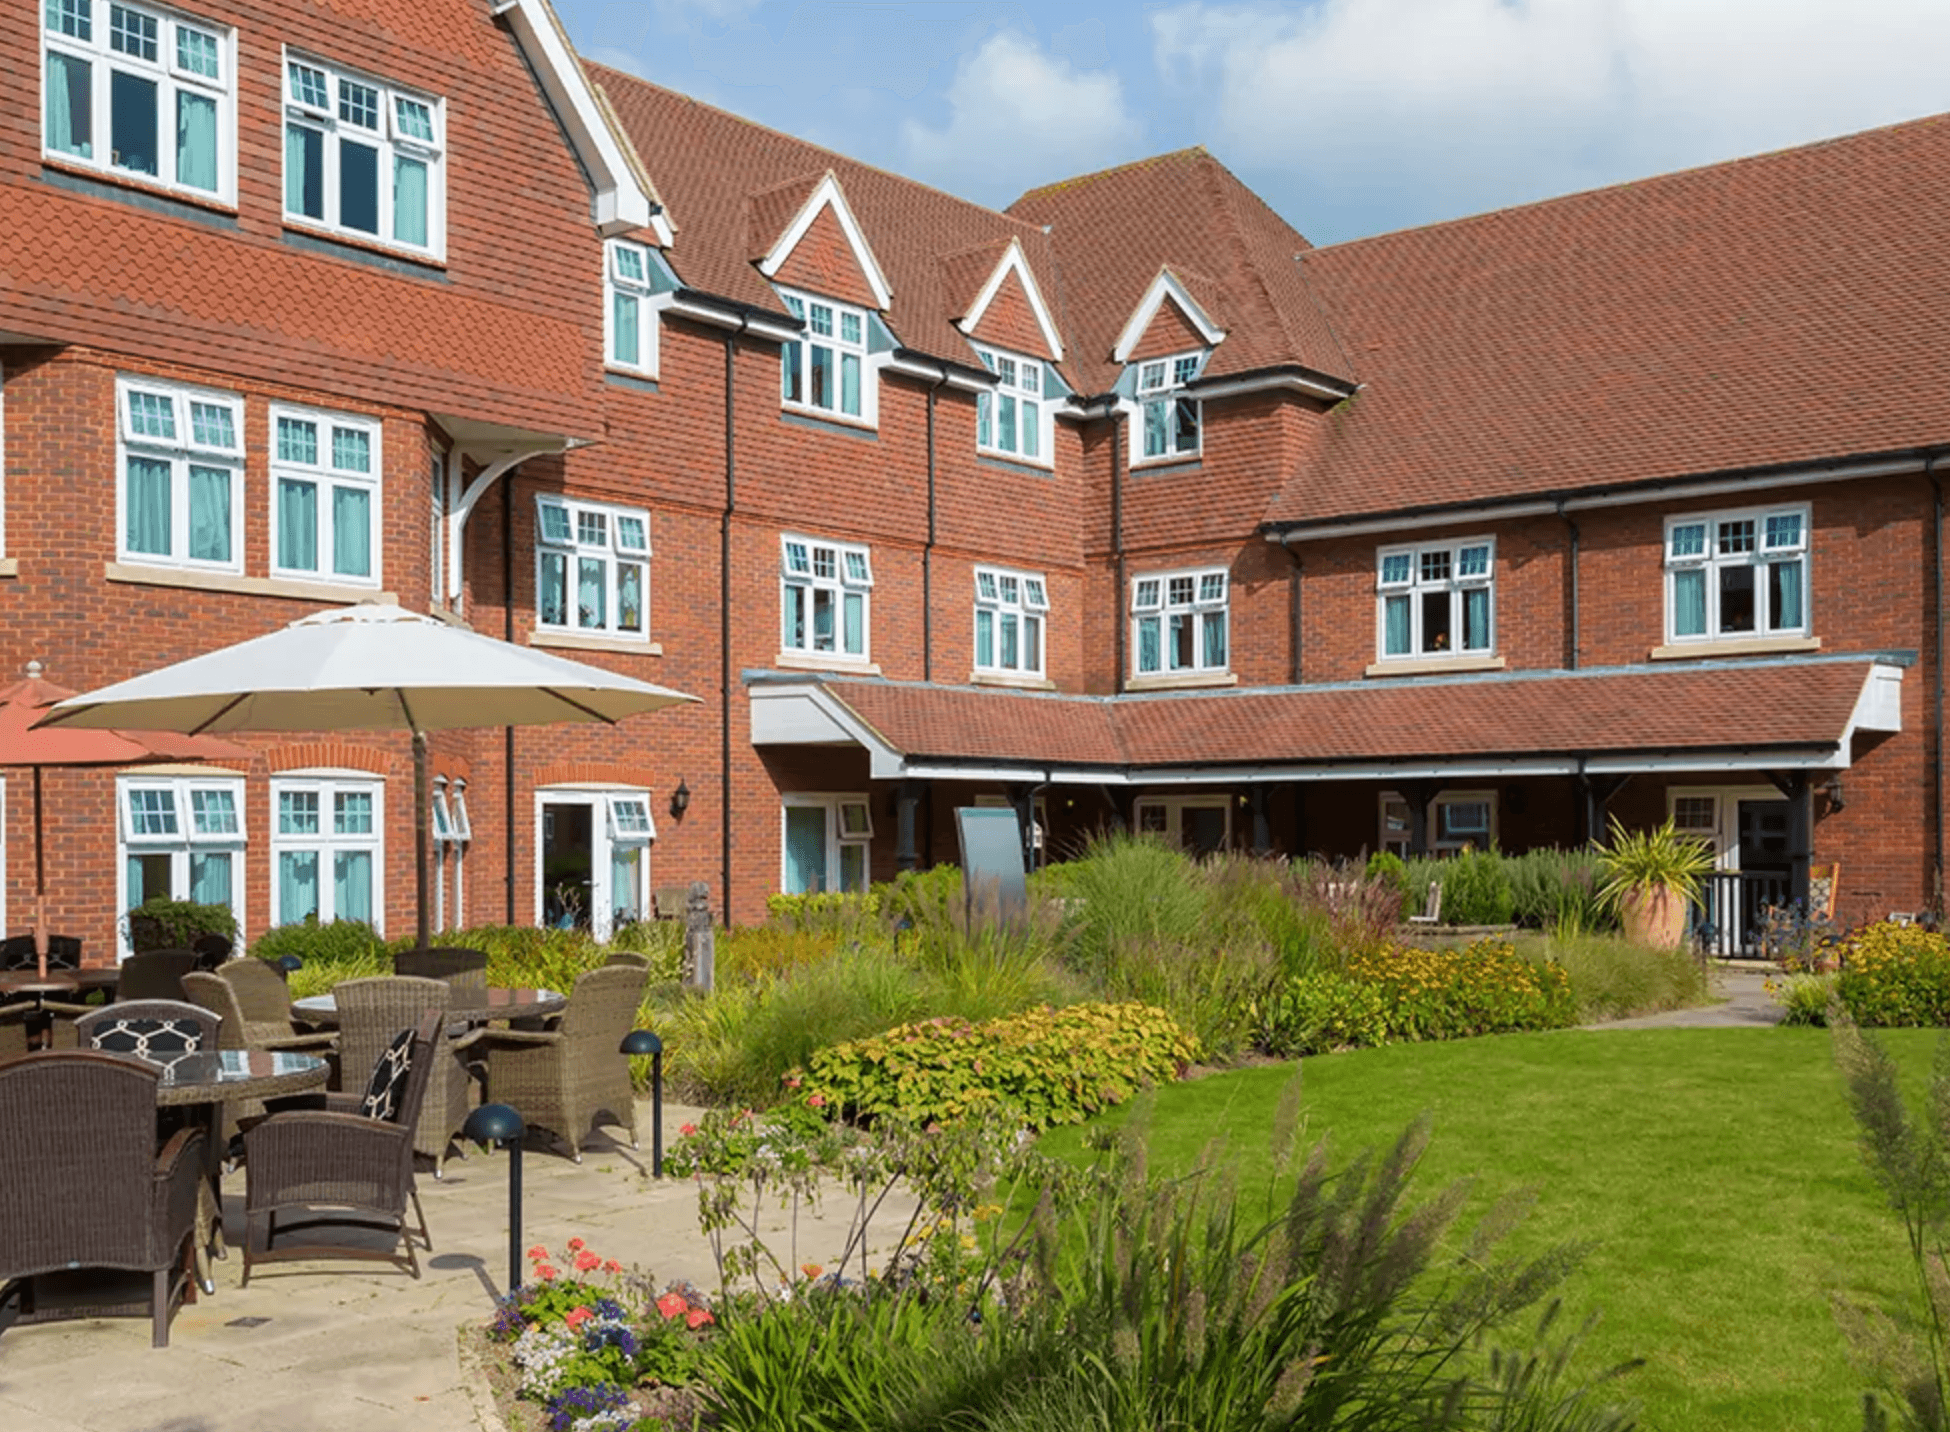 Exterior of Bagshot Gardens Care Home in Surrey, South East England